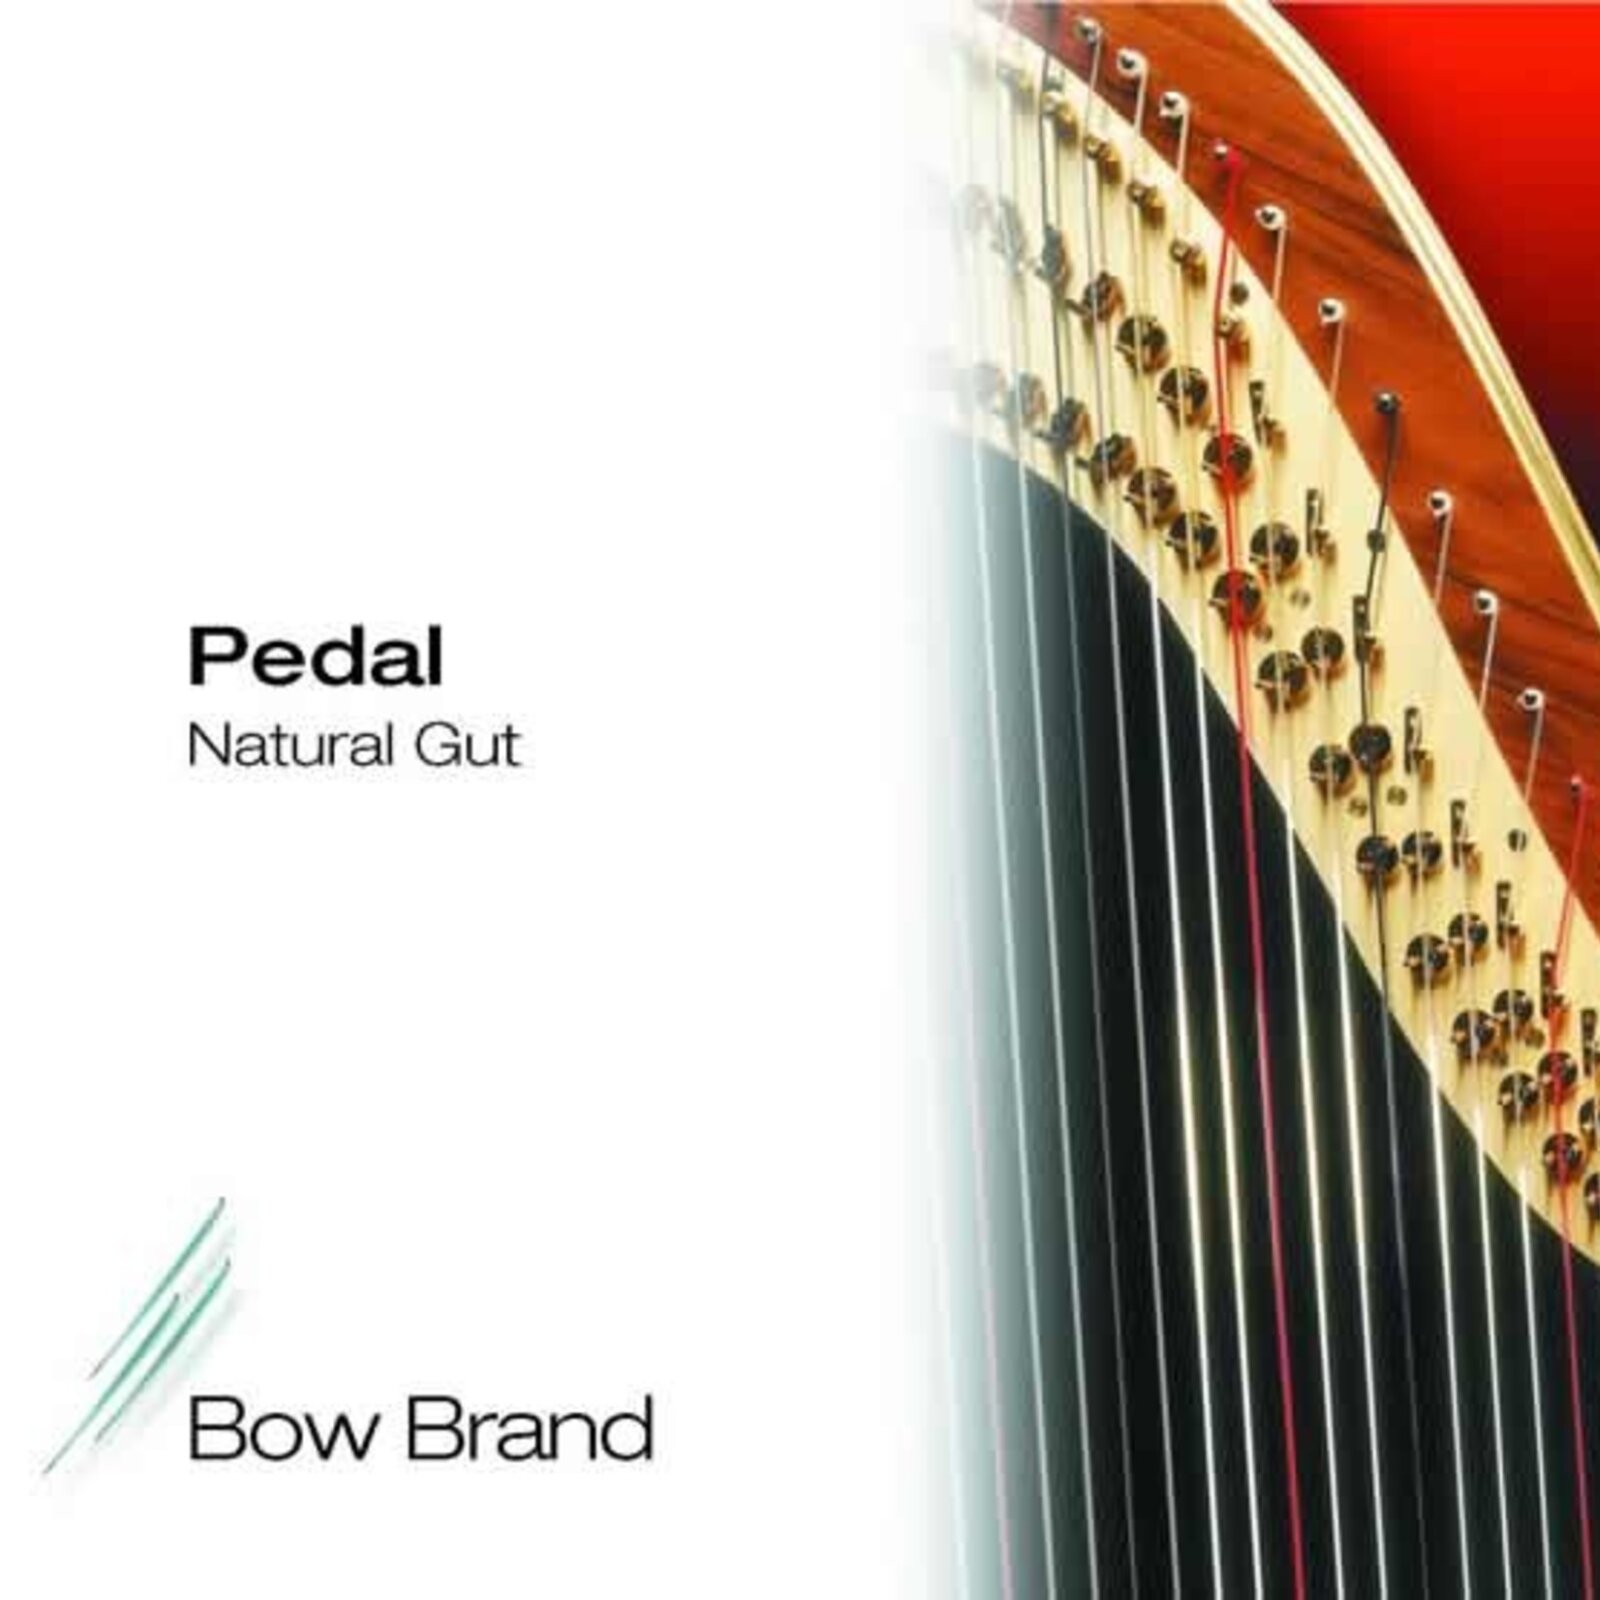 Bow Brand N 8 E 2nd octave in gut for pedal harp : photo 1